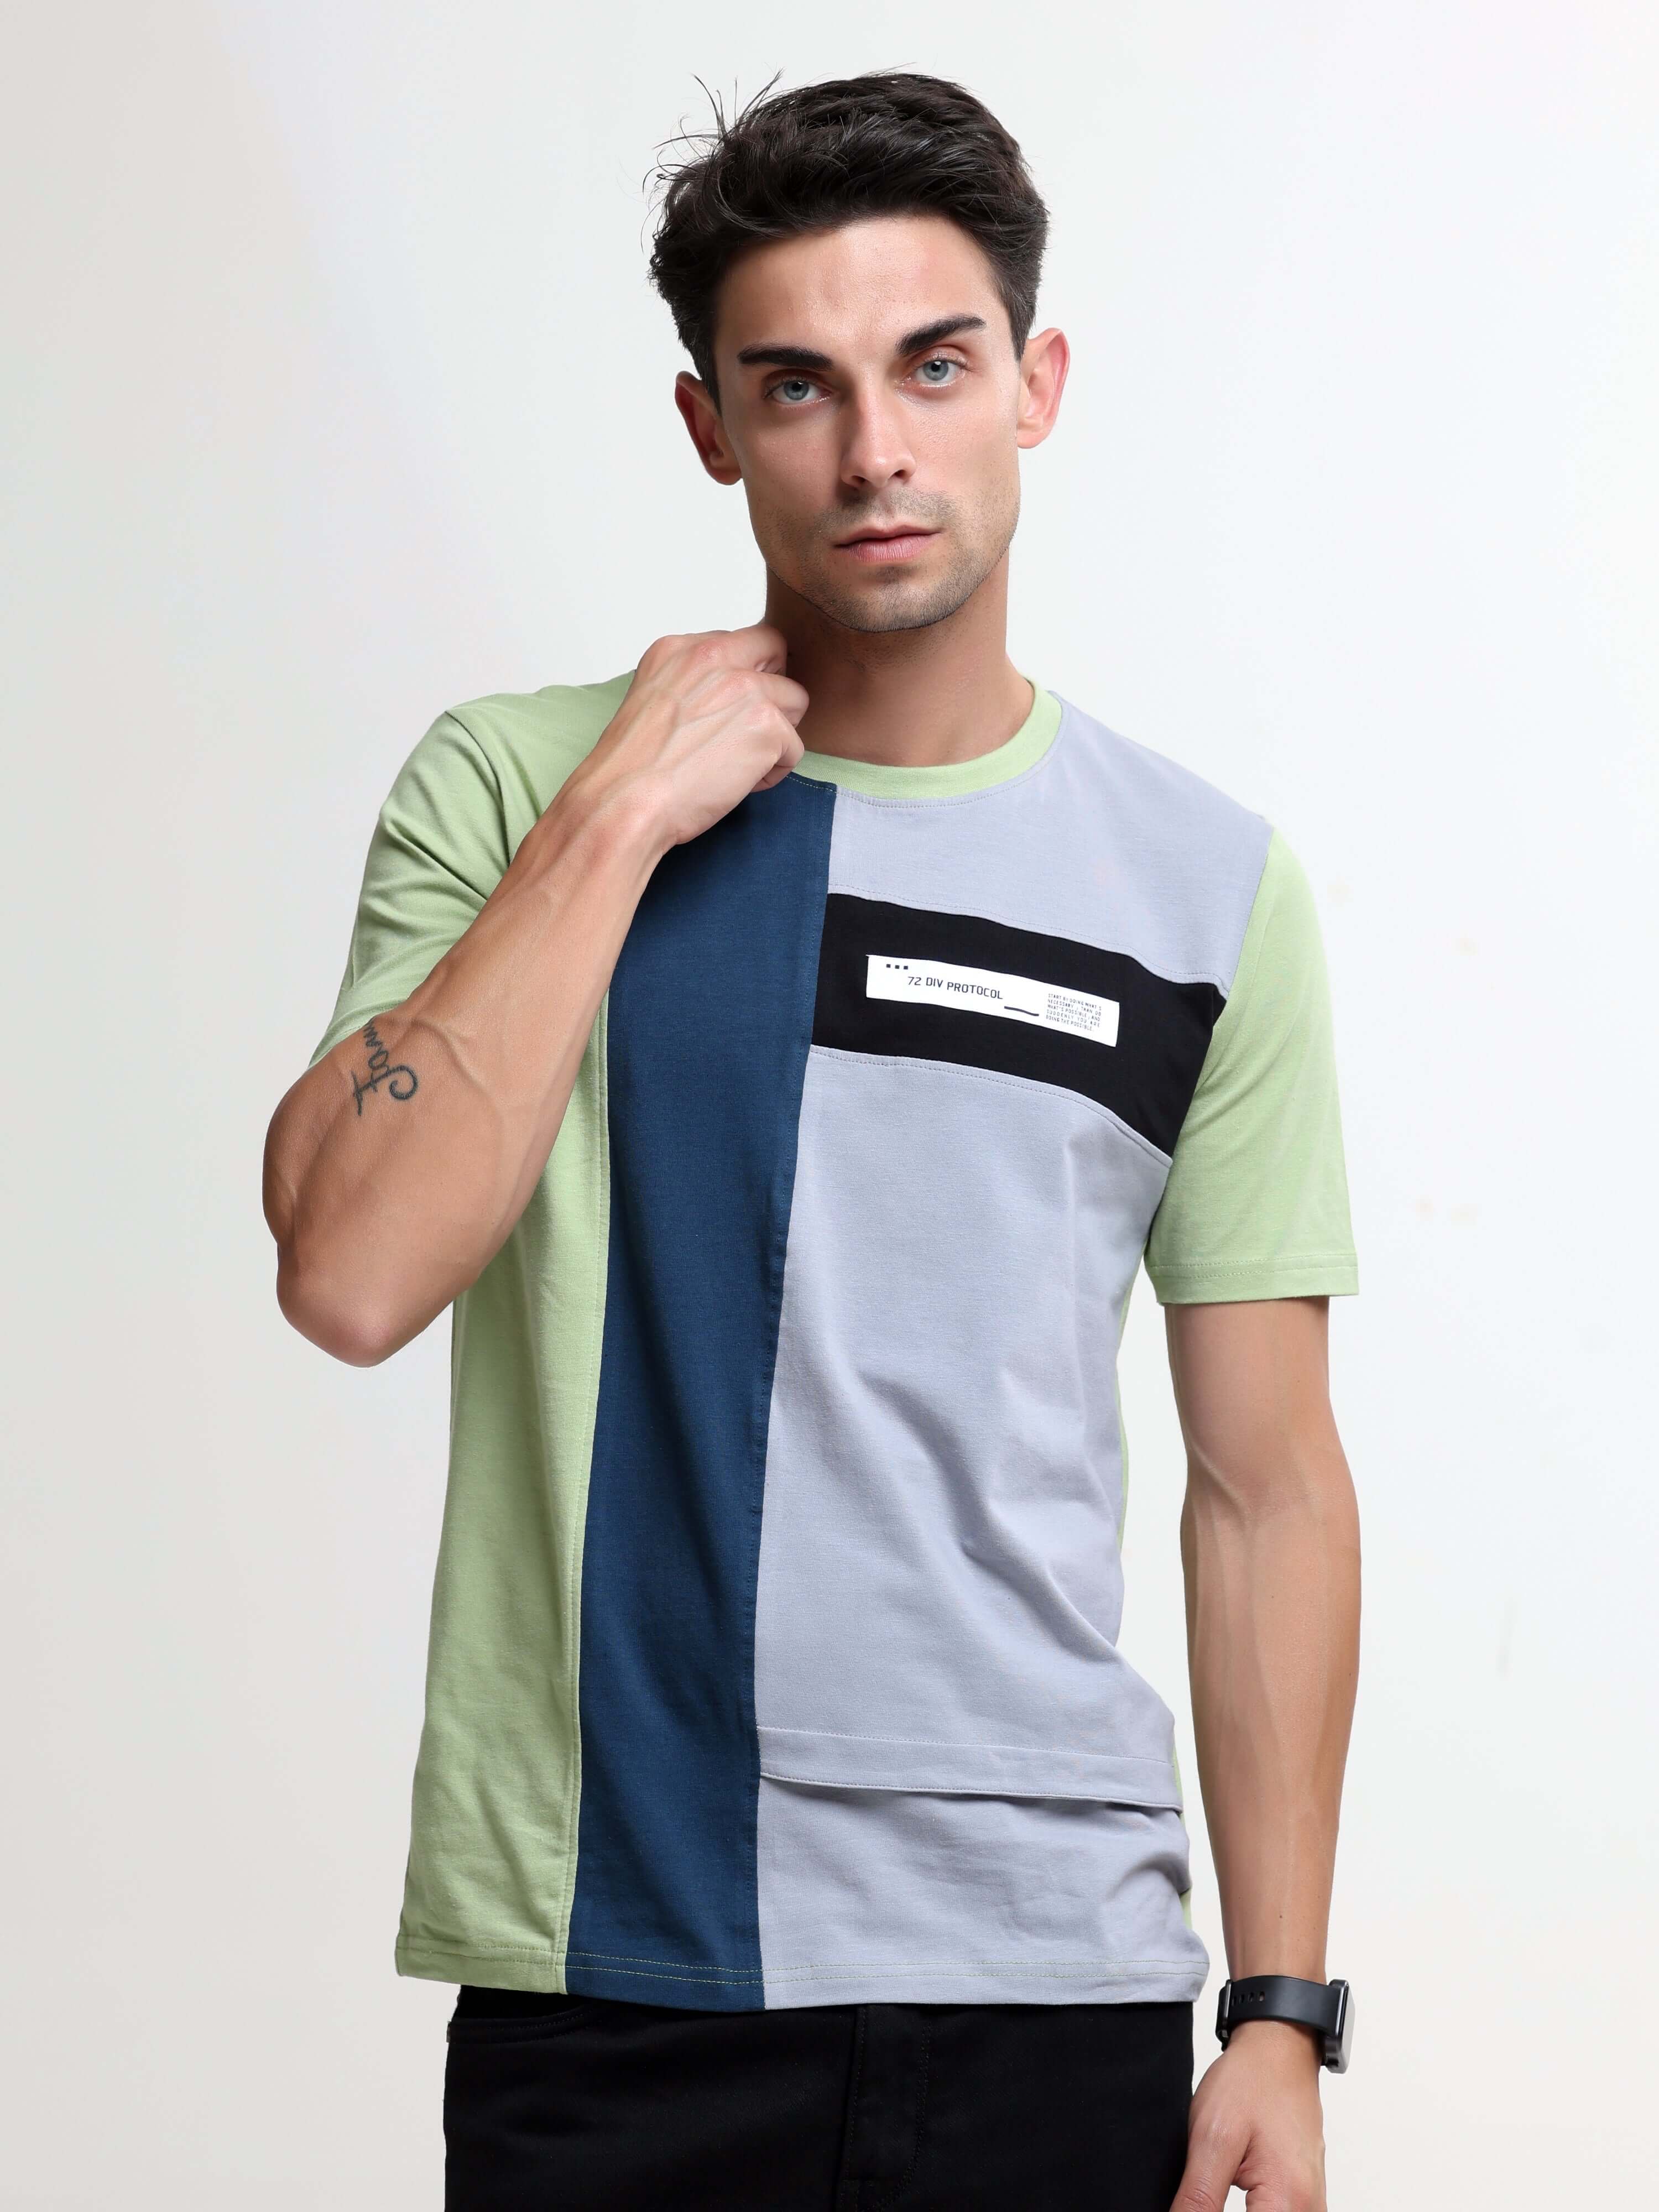 Ignite cardamom green light weight tshirt shop online at Estilocus. This relax-fit Cut and Sew T-shirt is comfortable and the perfect essential all year round. Pair it with white jeans and sneakers and layer it up with a denim jacket for a casual and put-